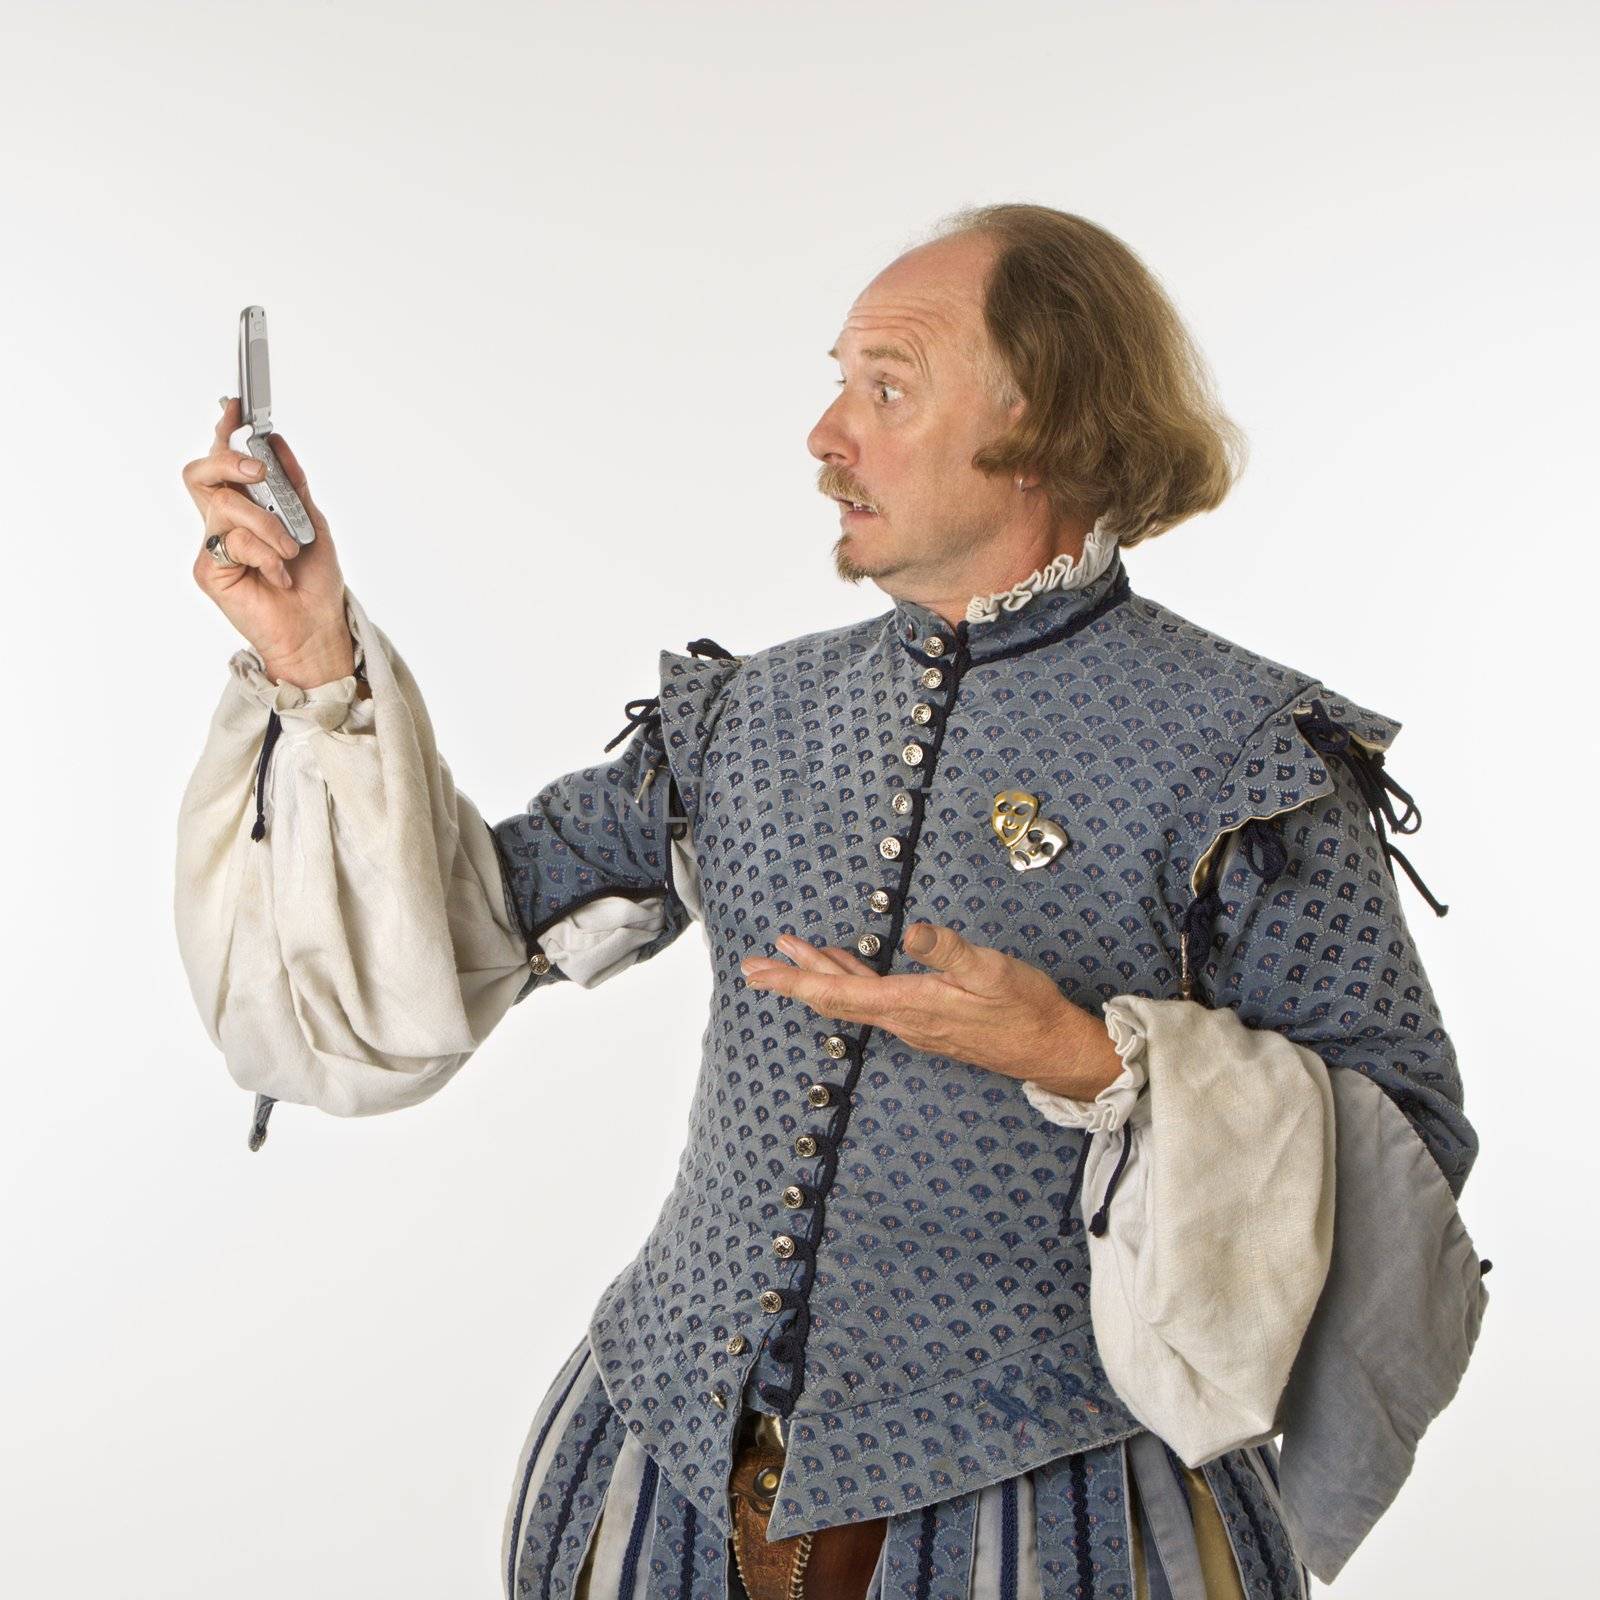 Shakespeare looking at phone. by iofoto